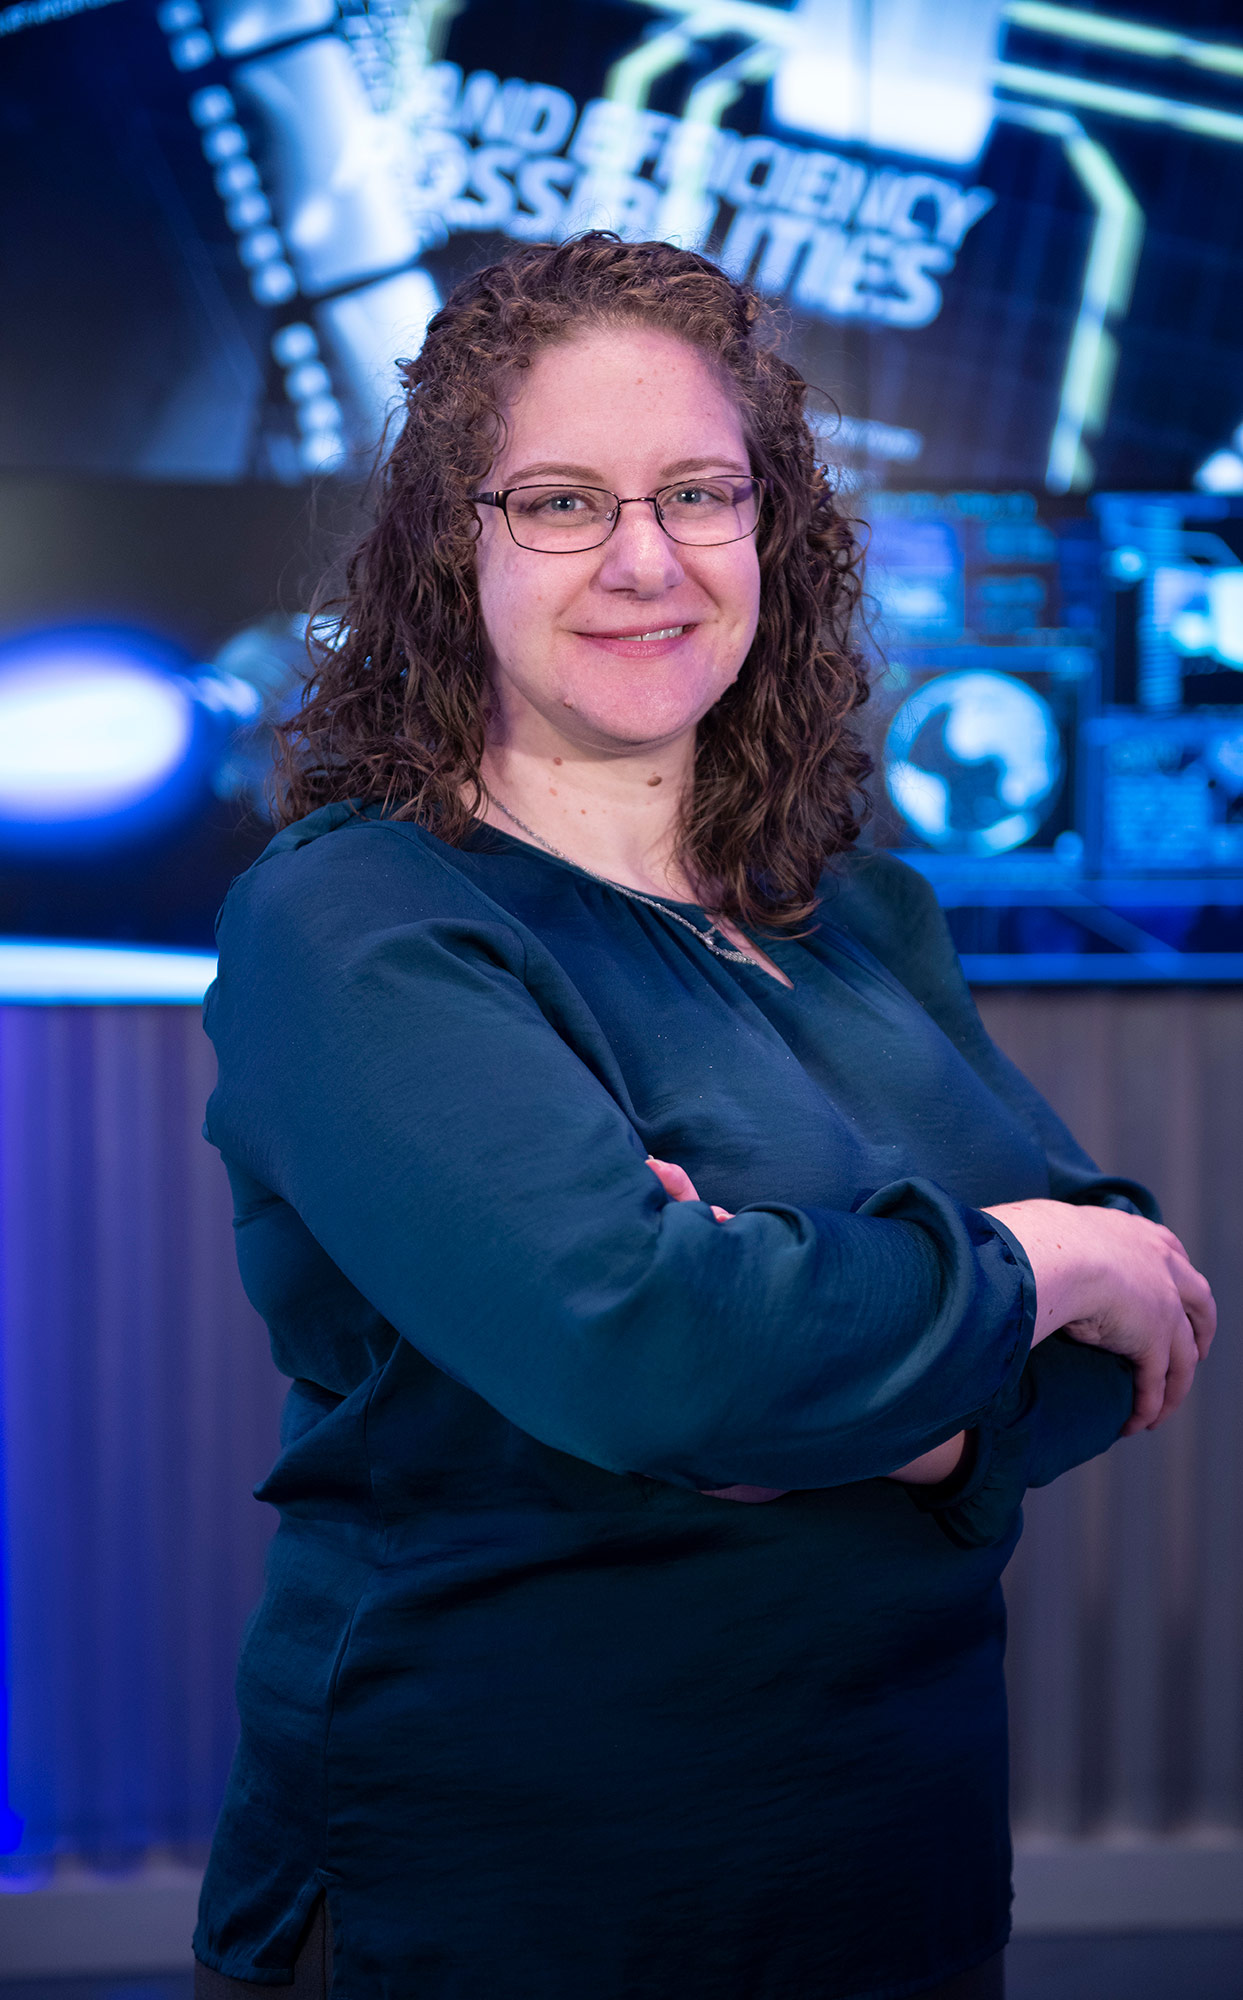 A white woman stands with her arms crossed in front of a computerized background